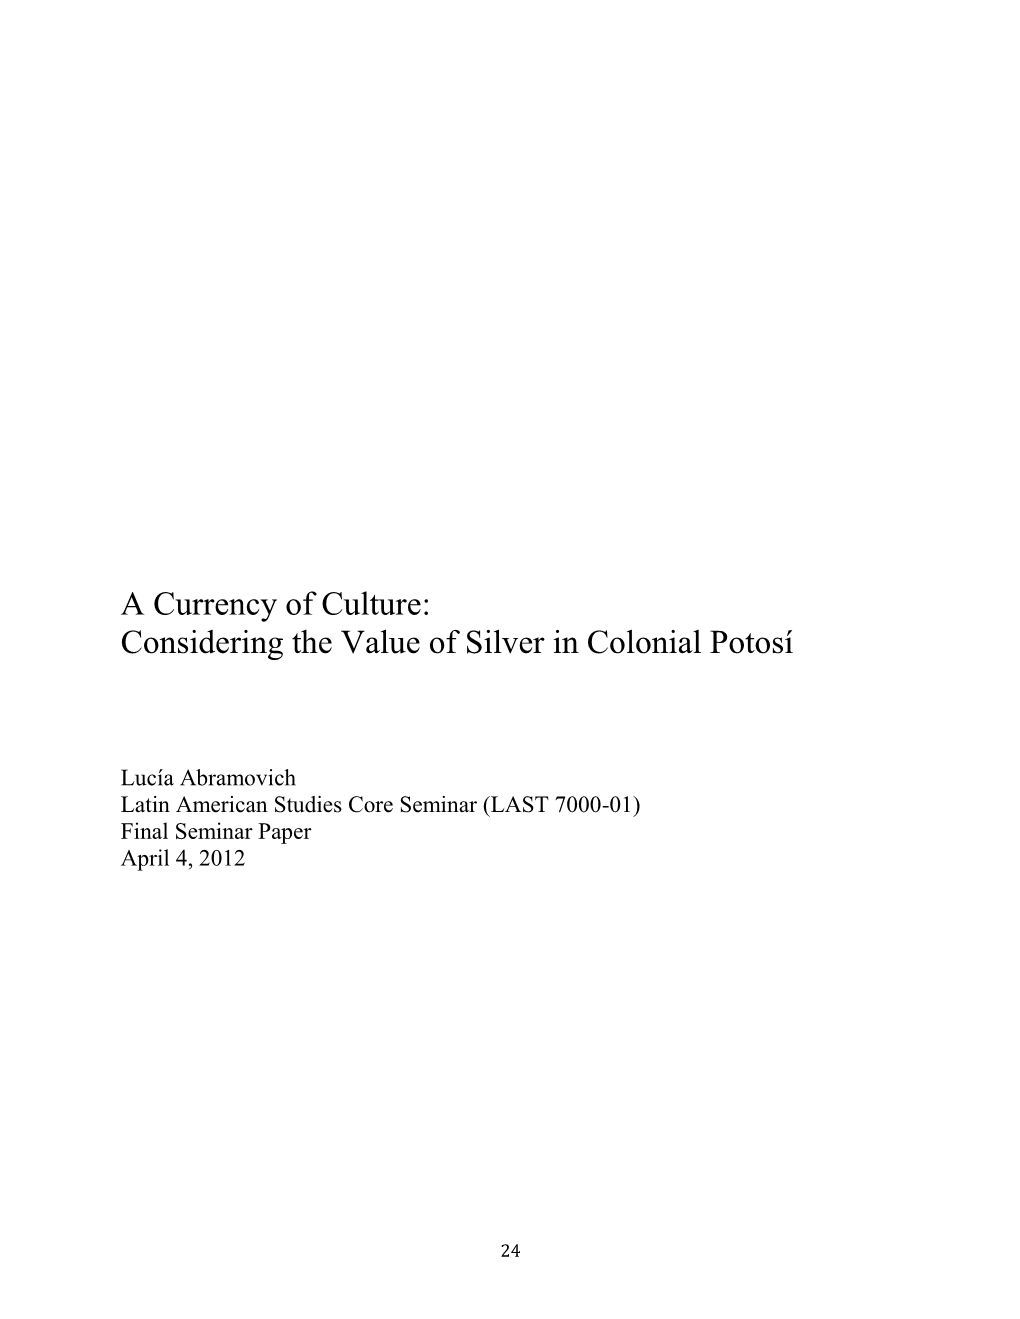 A Currency of Culture: Considering the Value of Silver in Colonial Potosí